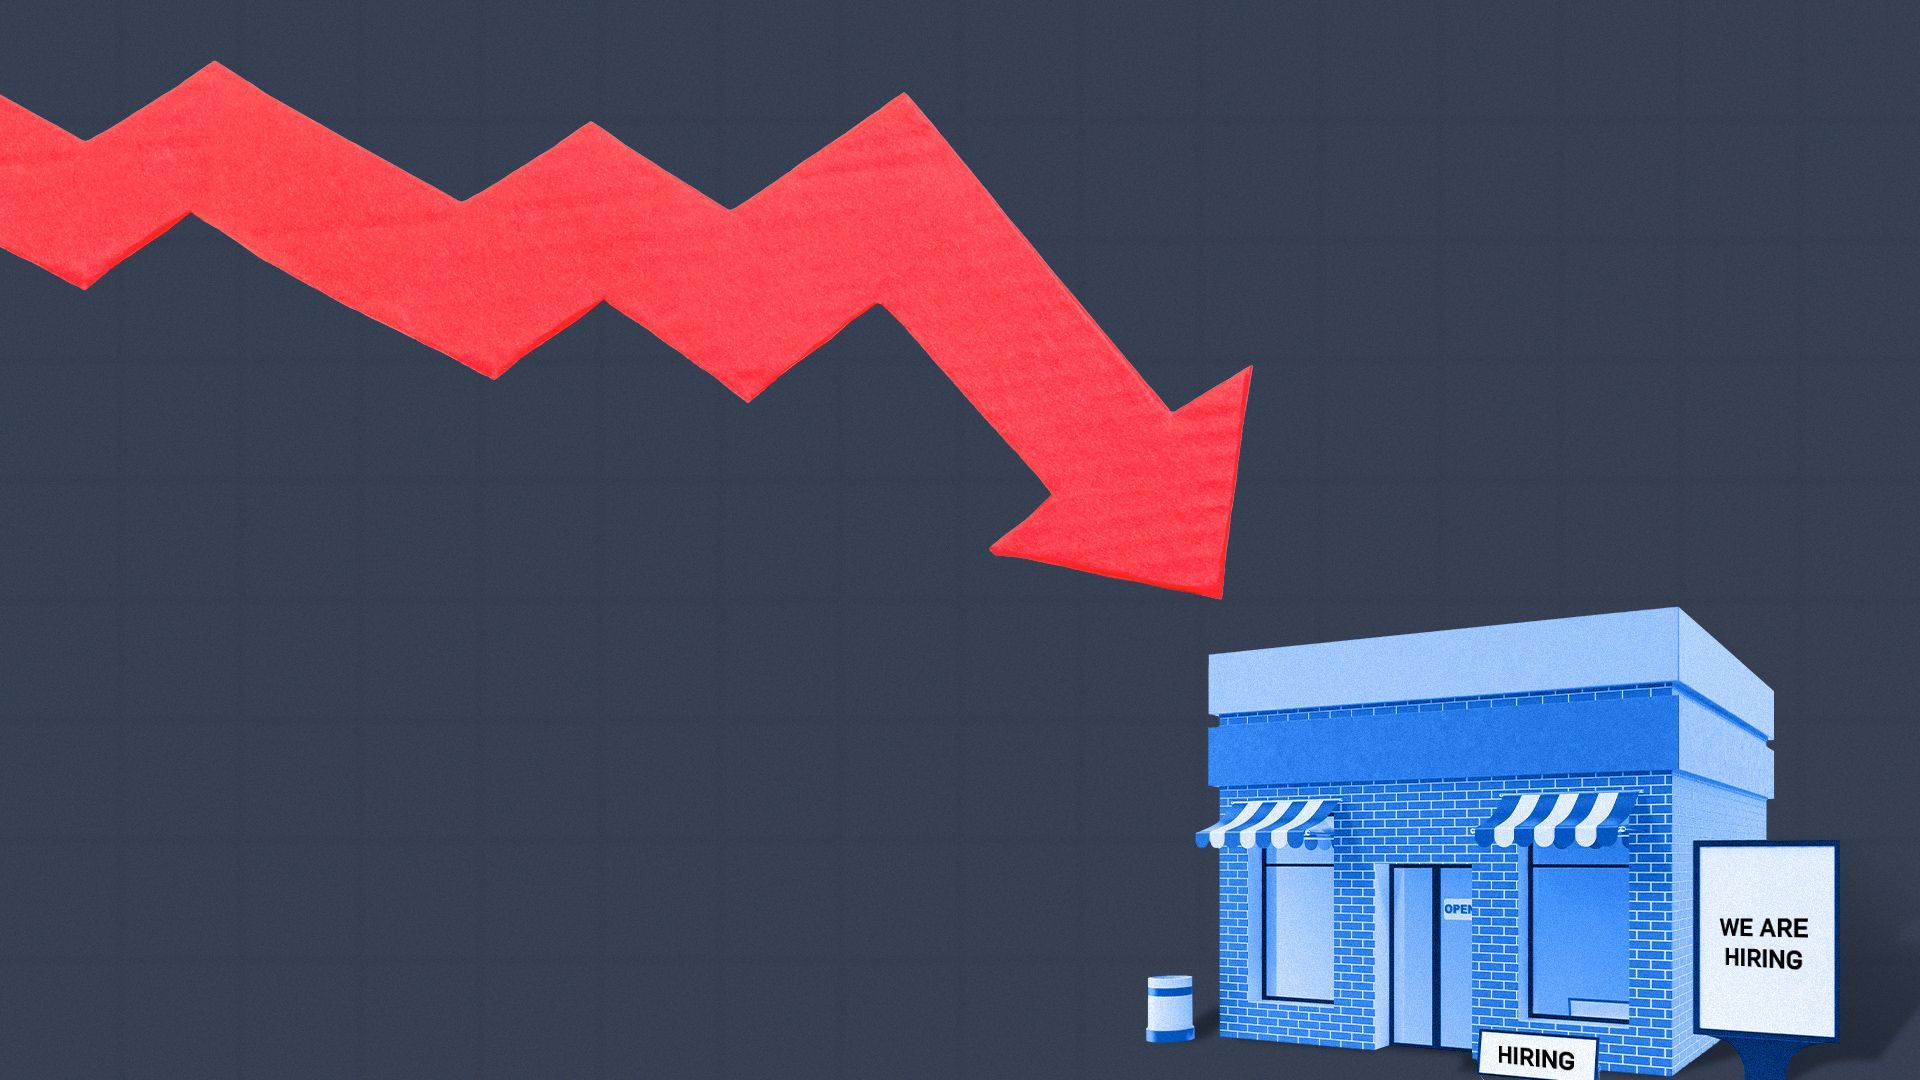 Illustration of a graph arrow going down and pointing to a business with hiring signs.